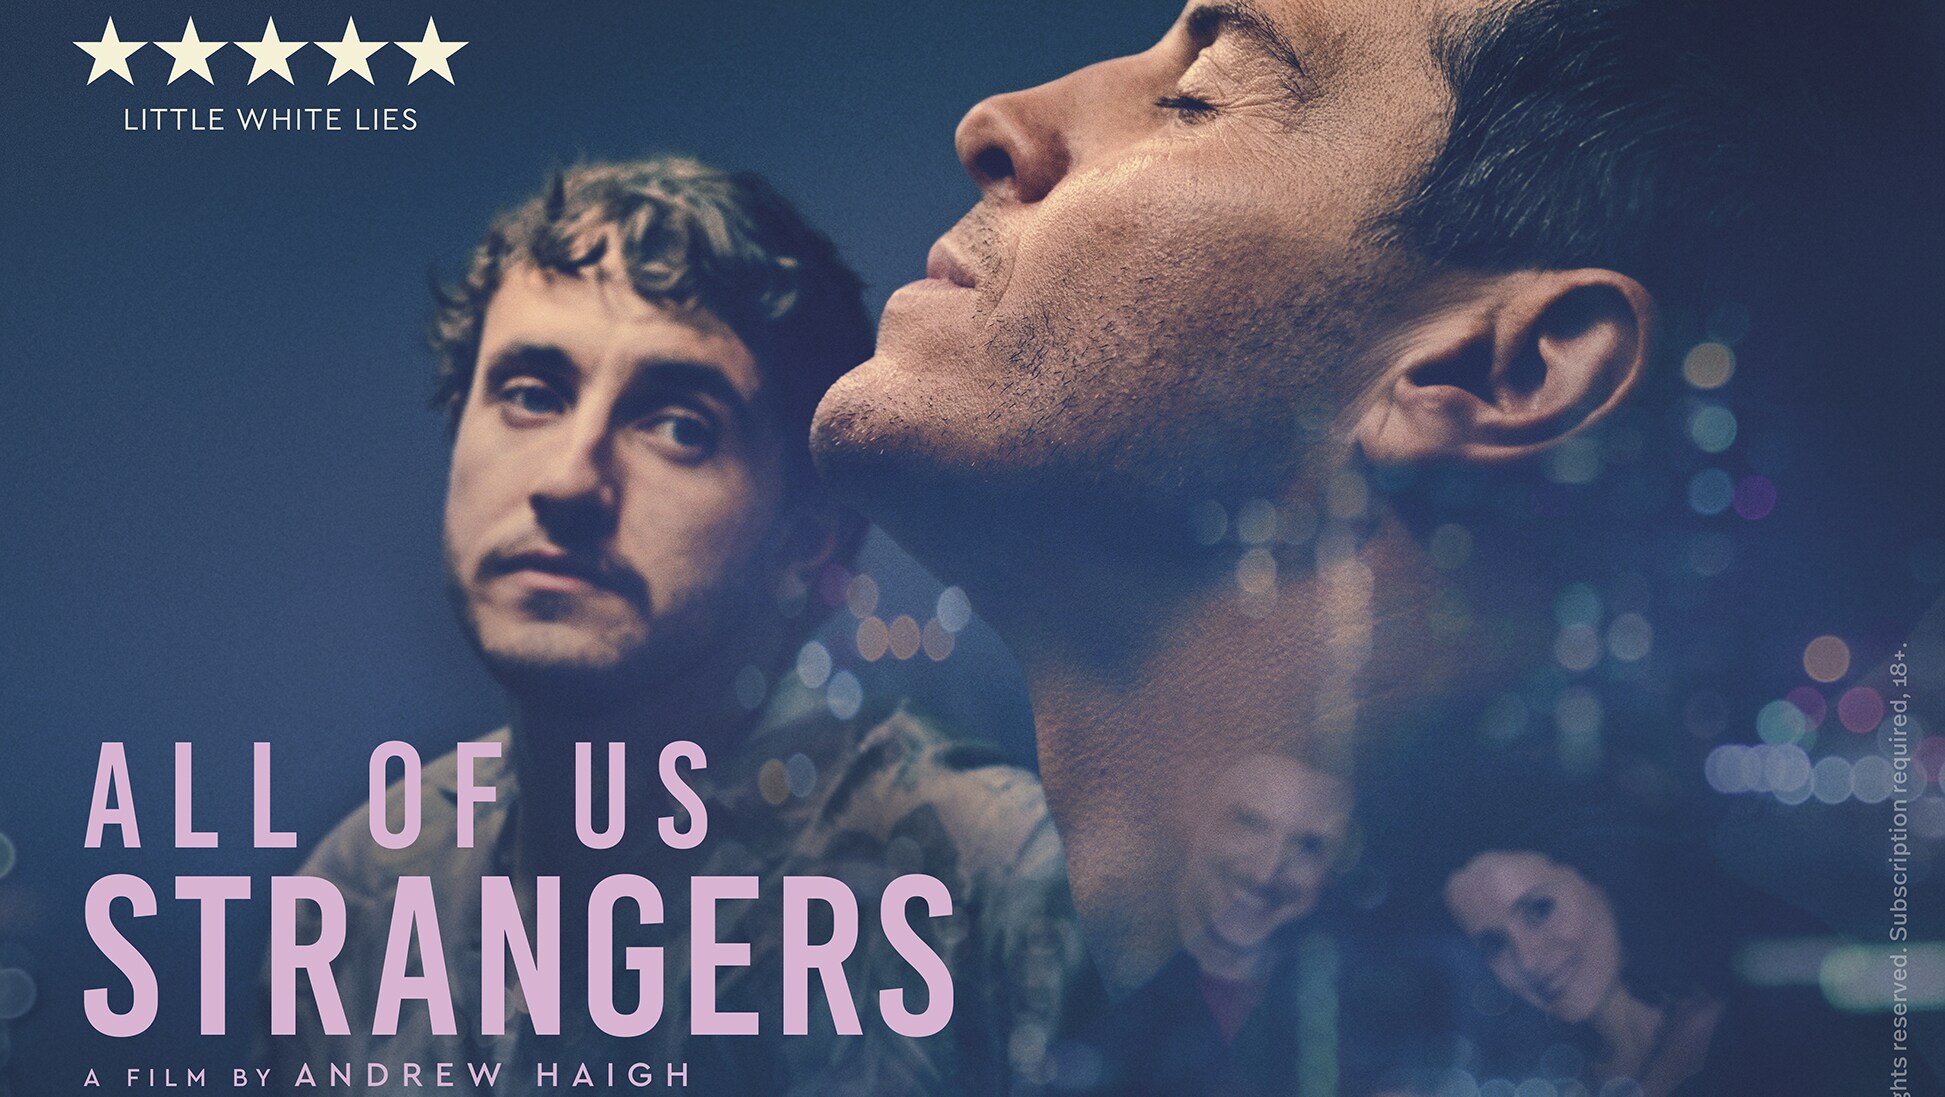 SEARCHLIGHT PICTURES’ “ALL OF US STRANGERS” TO STREAM MARCH 20, EXCLUSIVELY ON DISNEY+